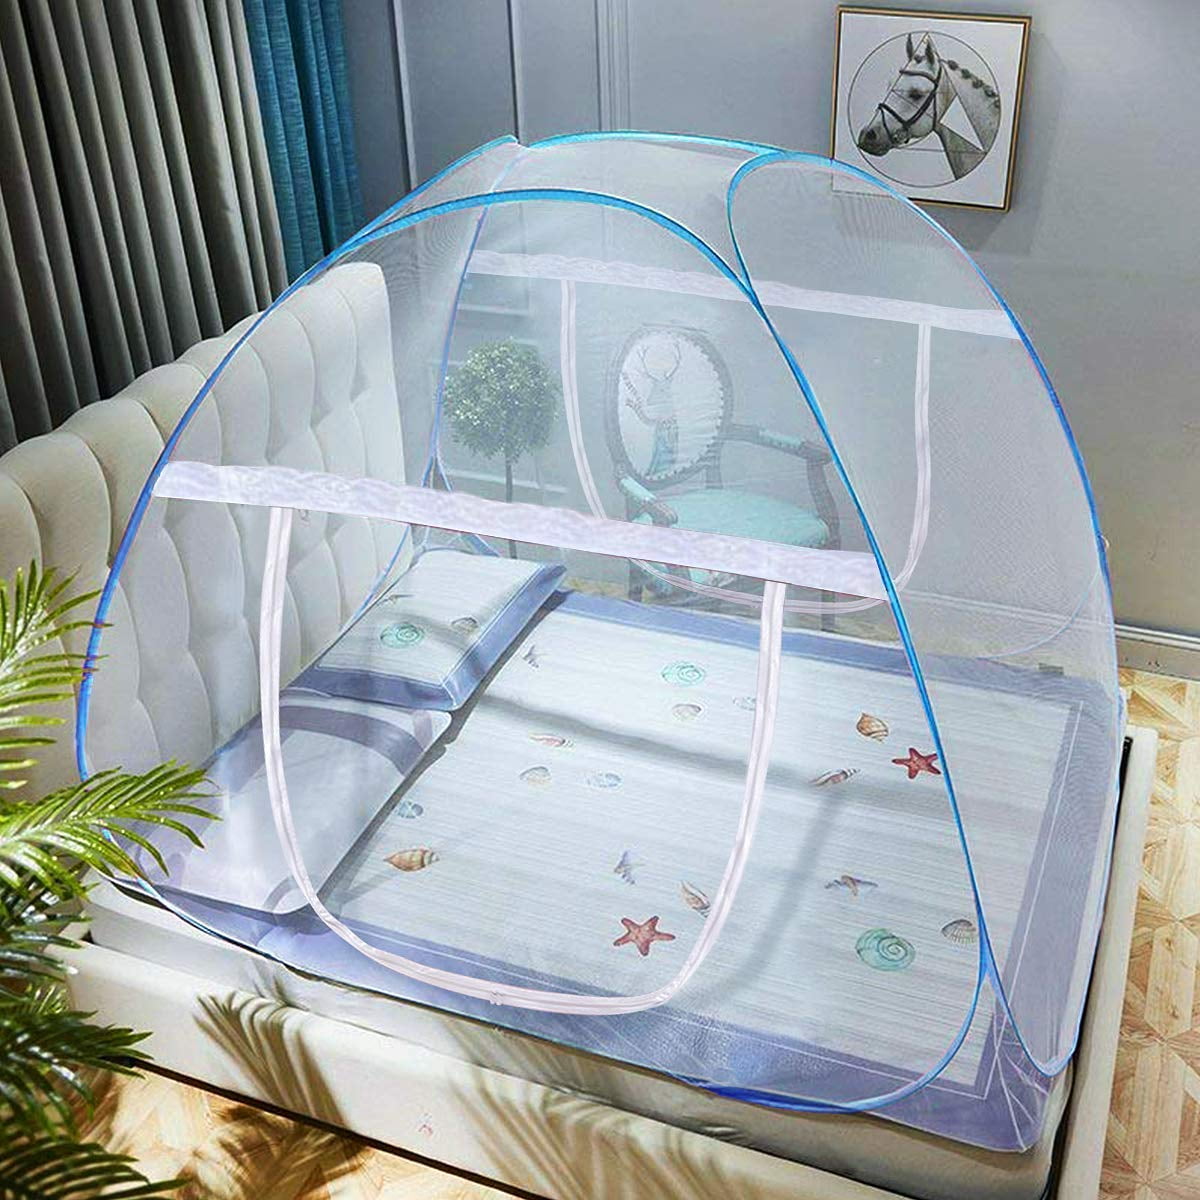 Details about   Anti Mosquito Net Automatic Pop Up Tent Mosquito Killer Portable Breathable 